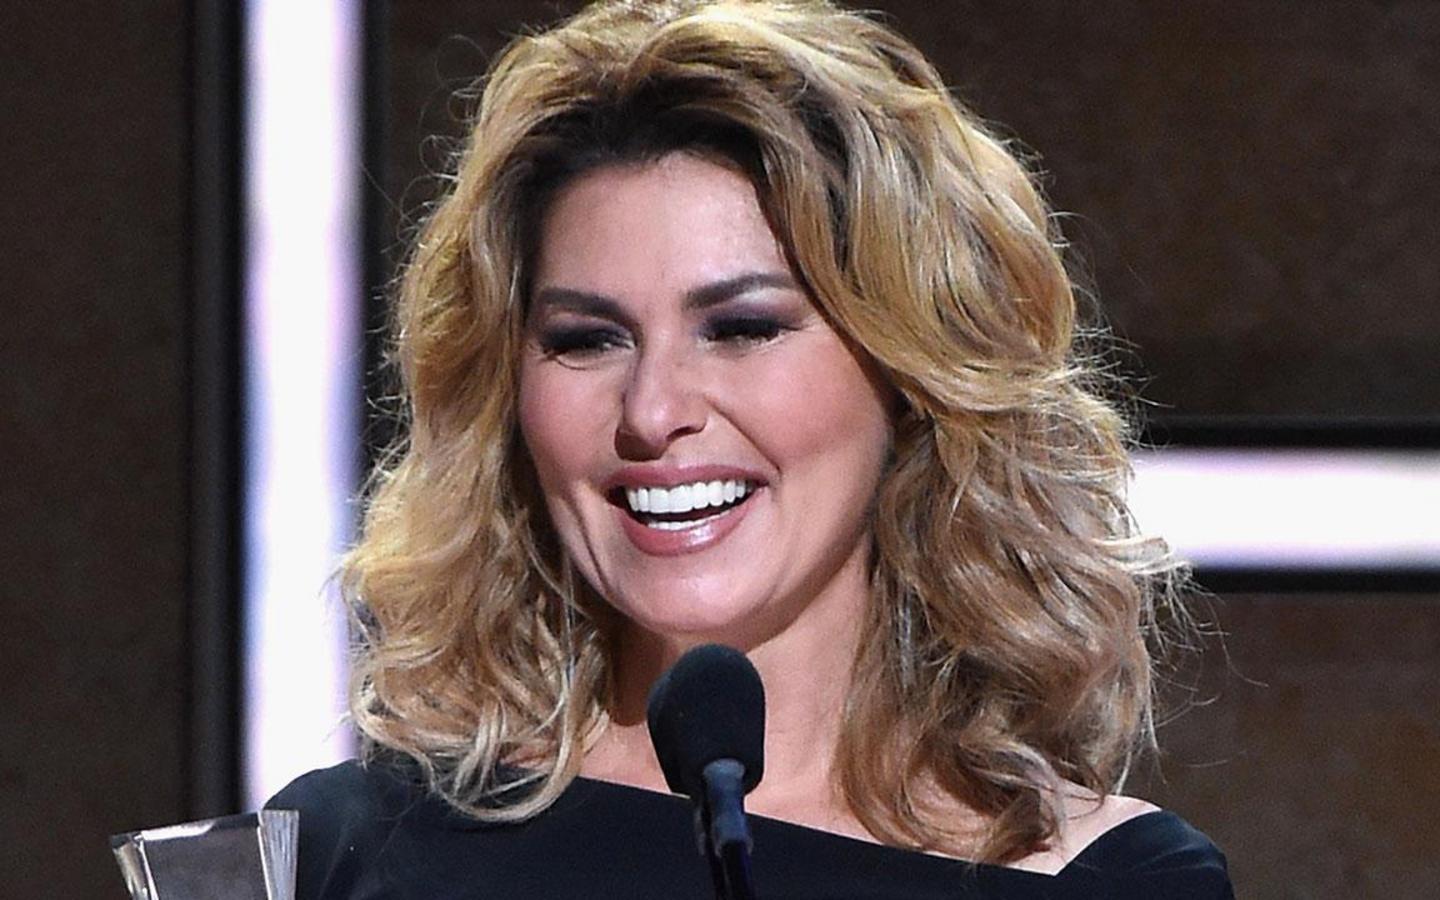 EXCLUSIVE: Shania Twain stuns at CMT Artists of the Year event